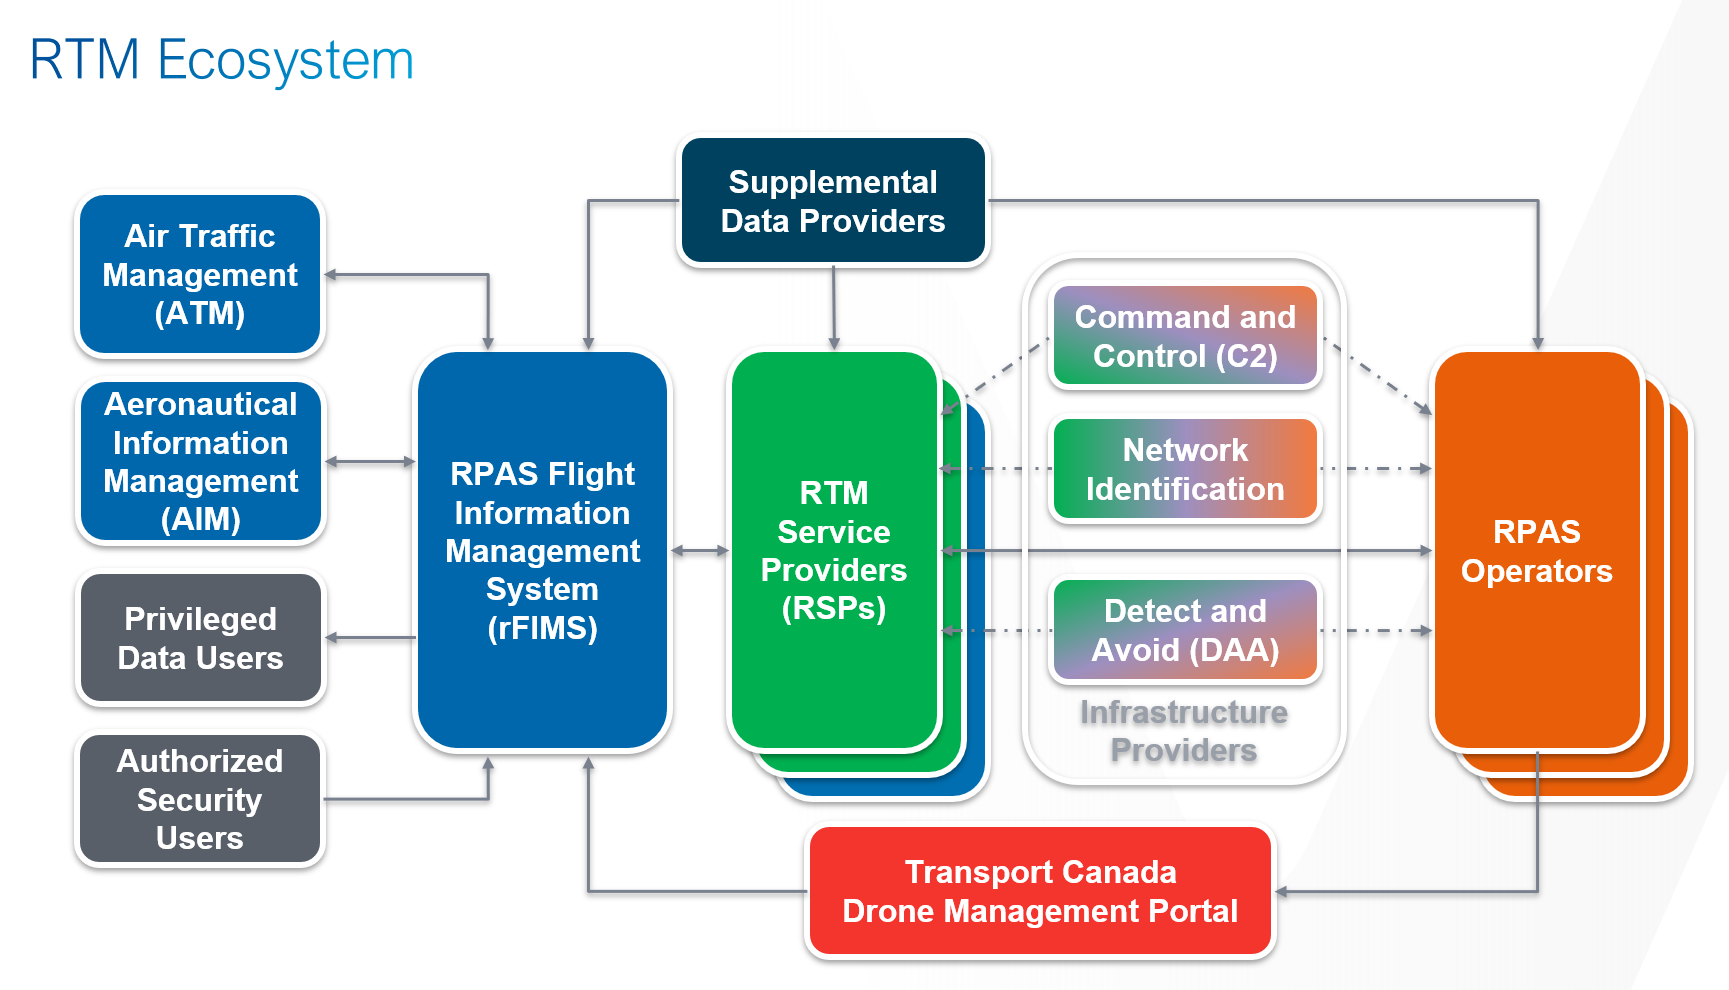 A diagram of the proposed RTM Ecosystem